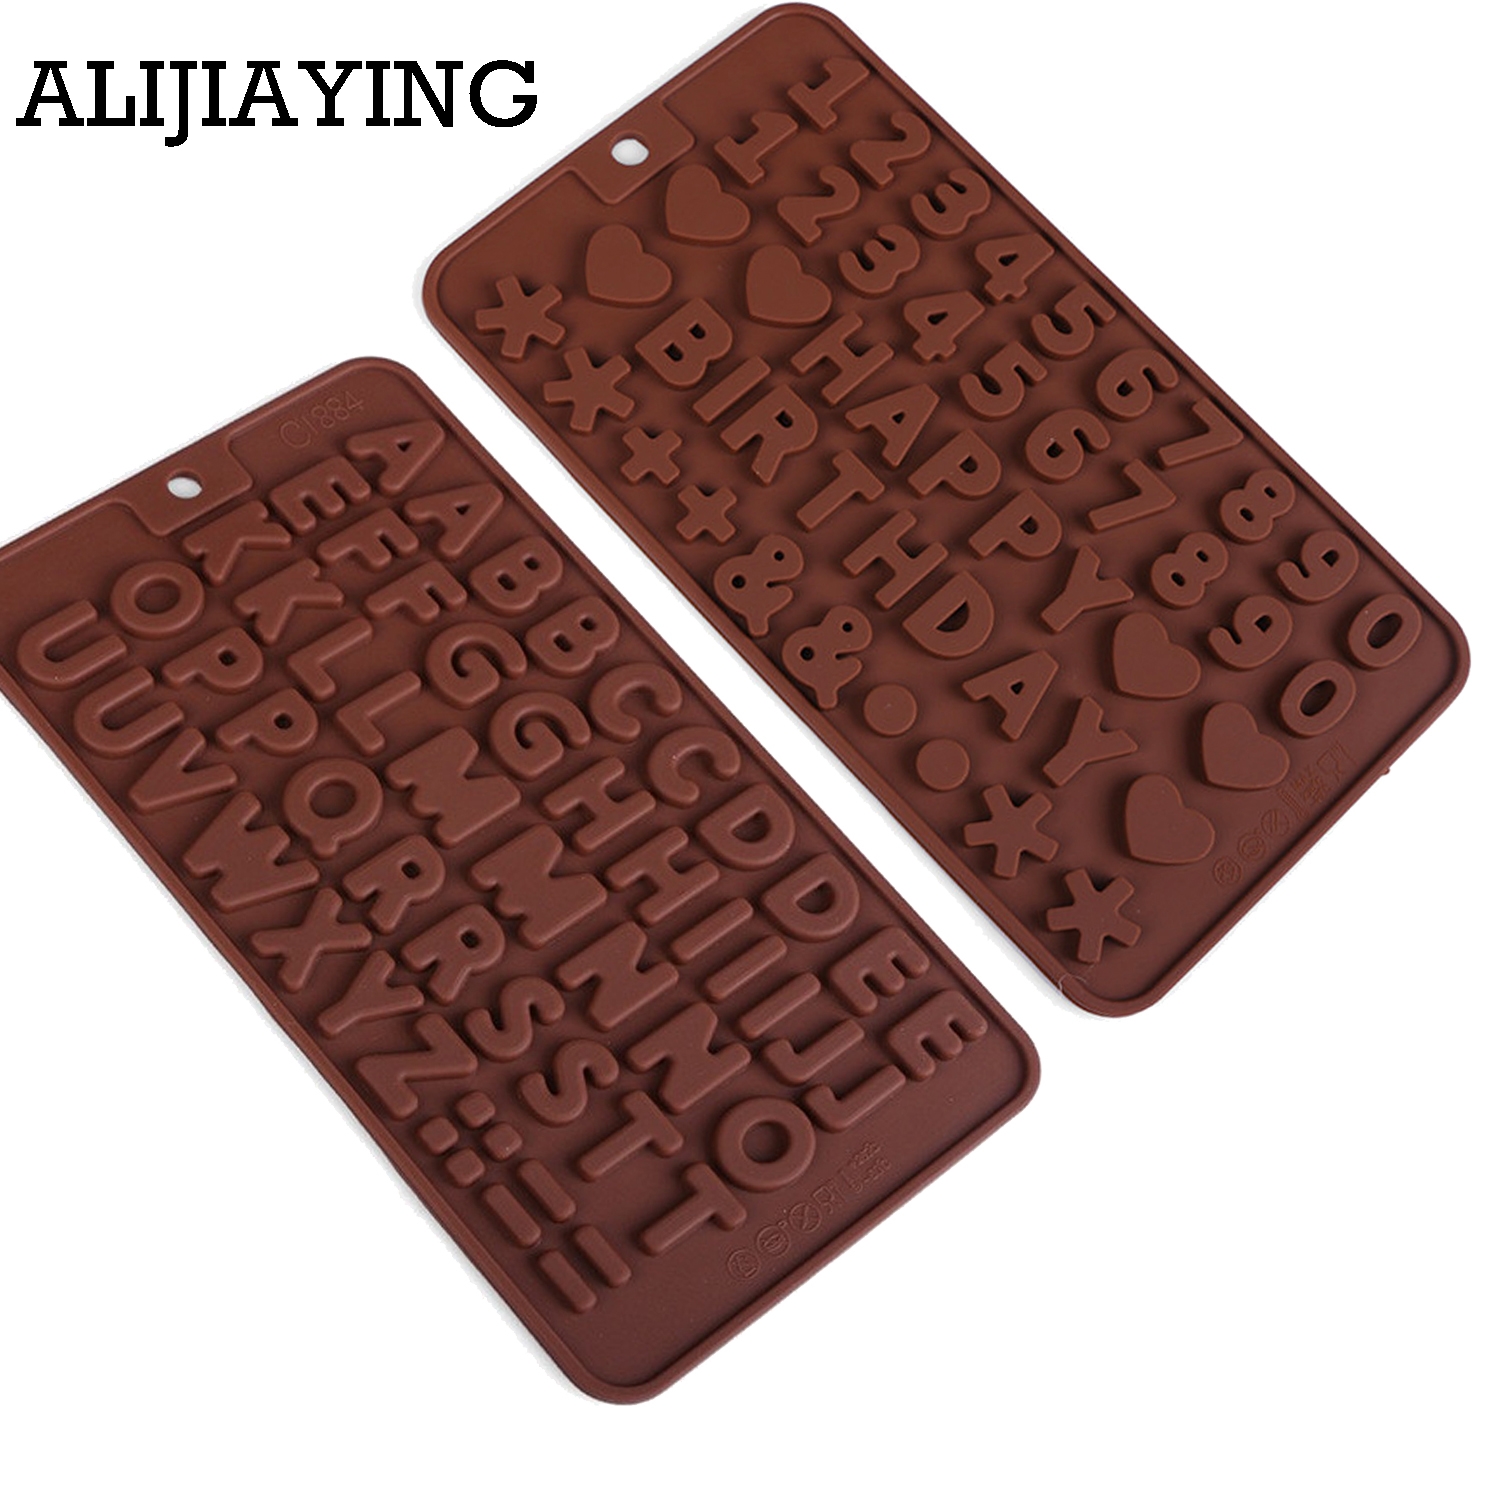 SILIKOLOVE New English Letters Silicone Chocolate Mold for Cake